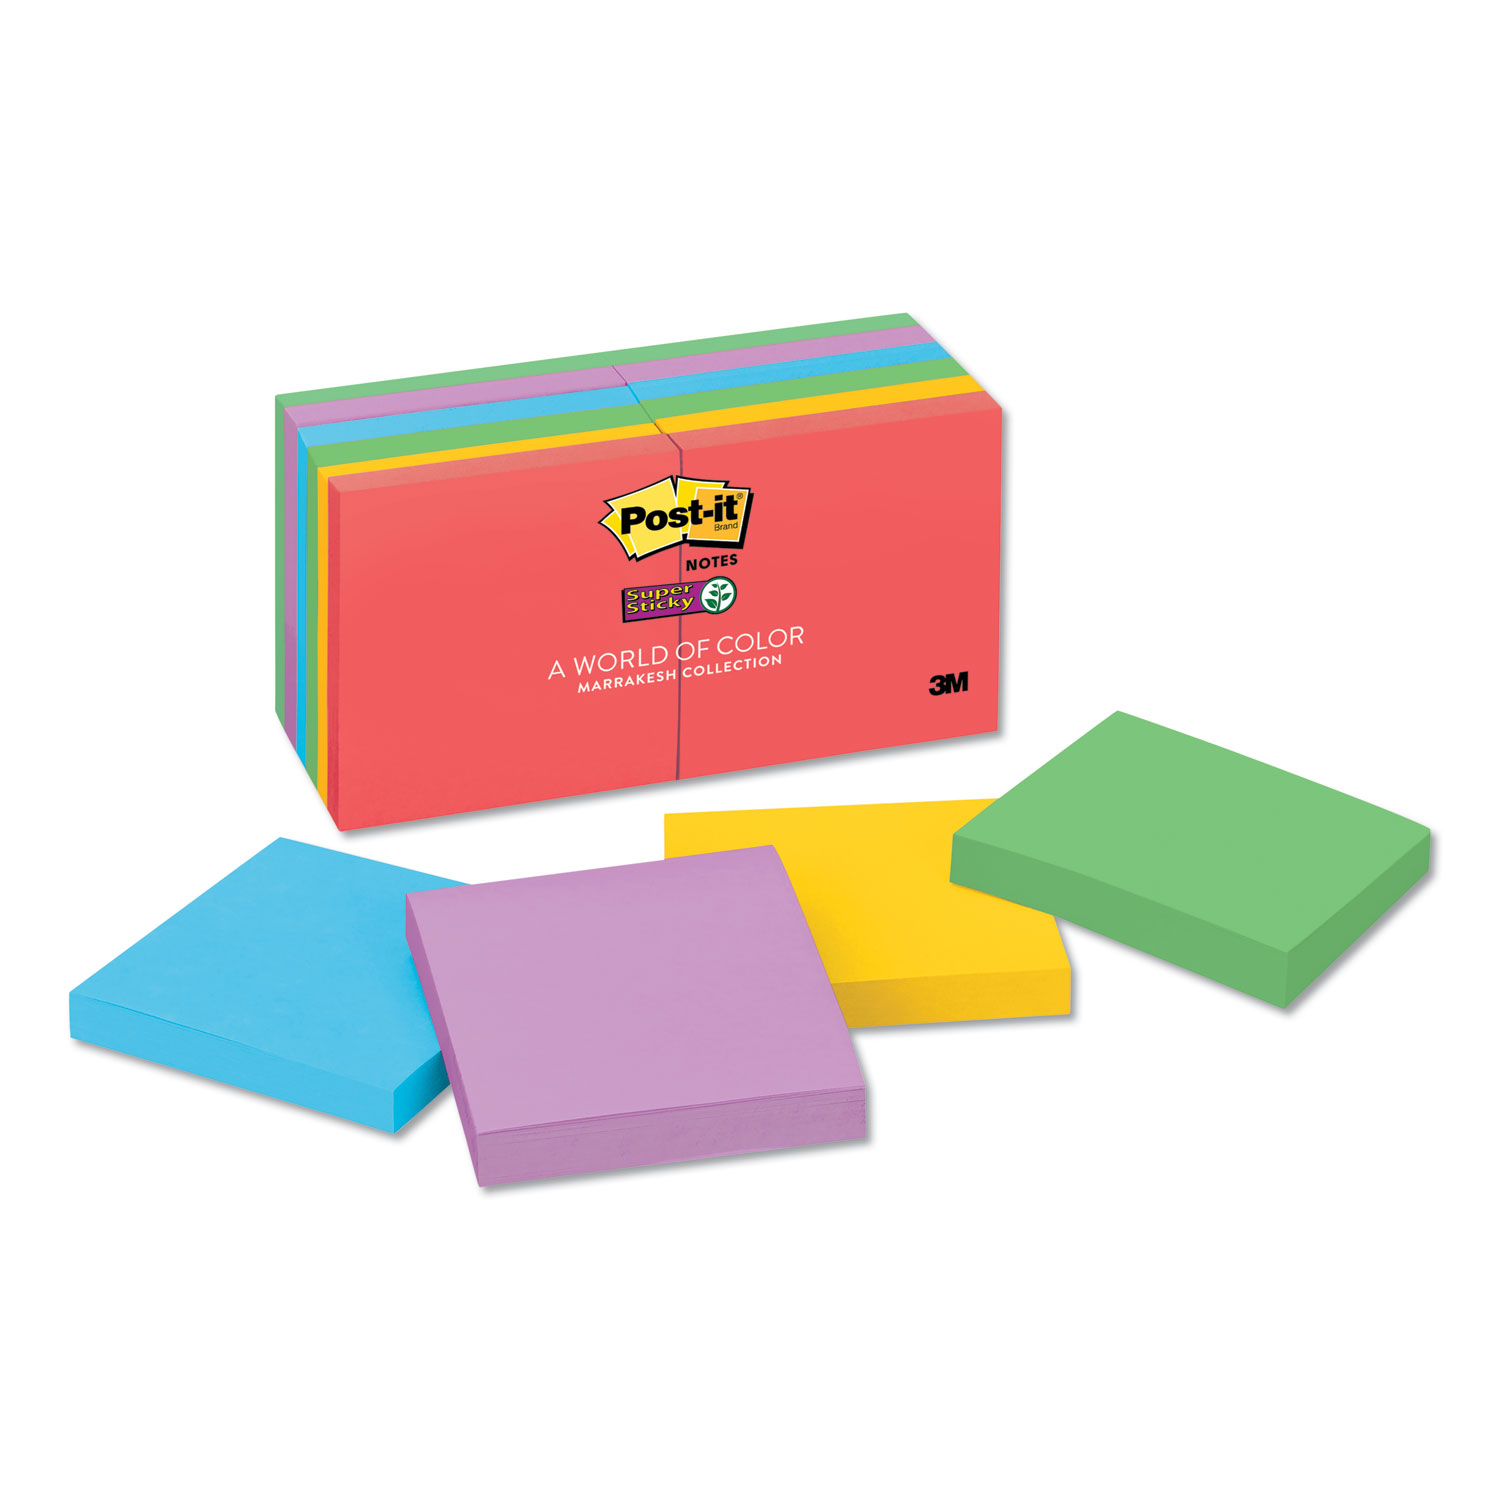  Post-it Notes Super Sticky 654-12SSAN Pads in Marrakesh Colors, 3 x 3, 90-Sheet, 12/Pack (MMM65412SSAN) 